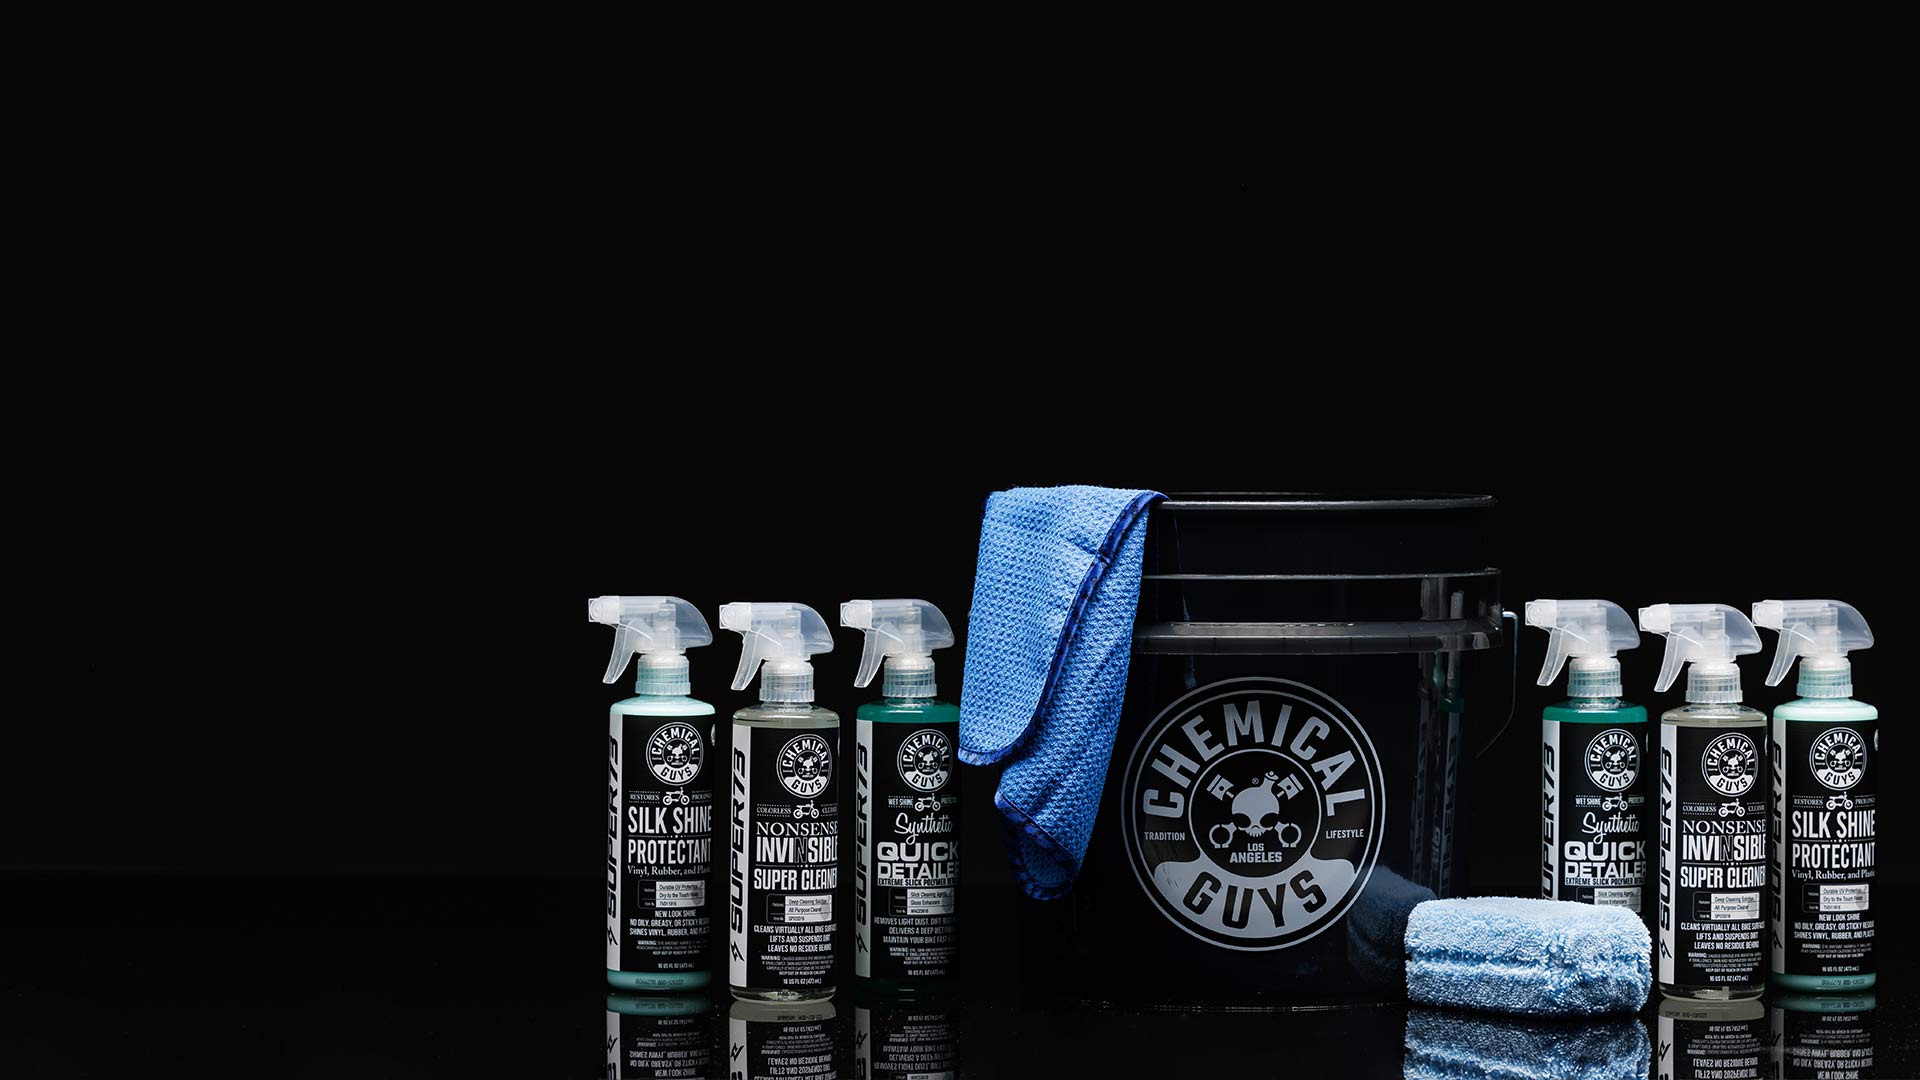 Studio image of SUPER73 x Chemical Guys cleaning products